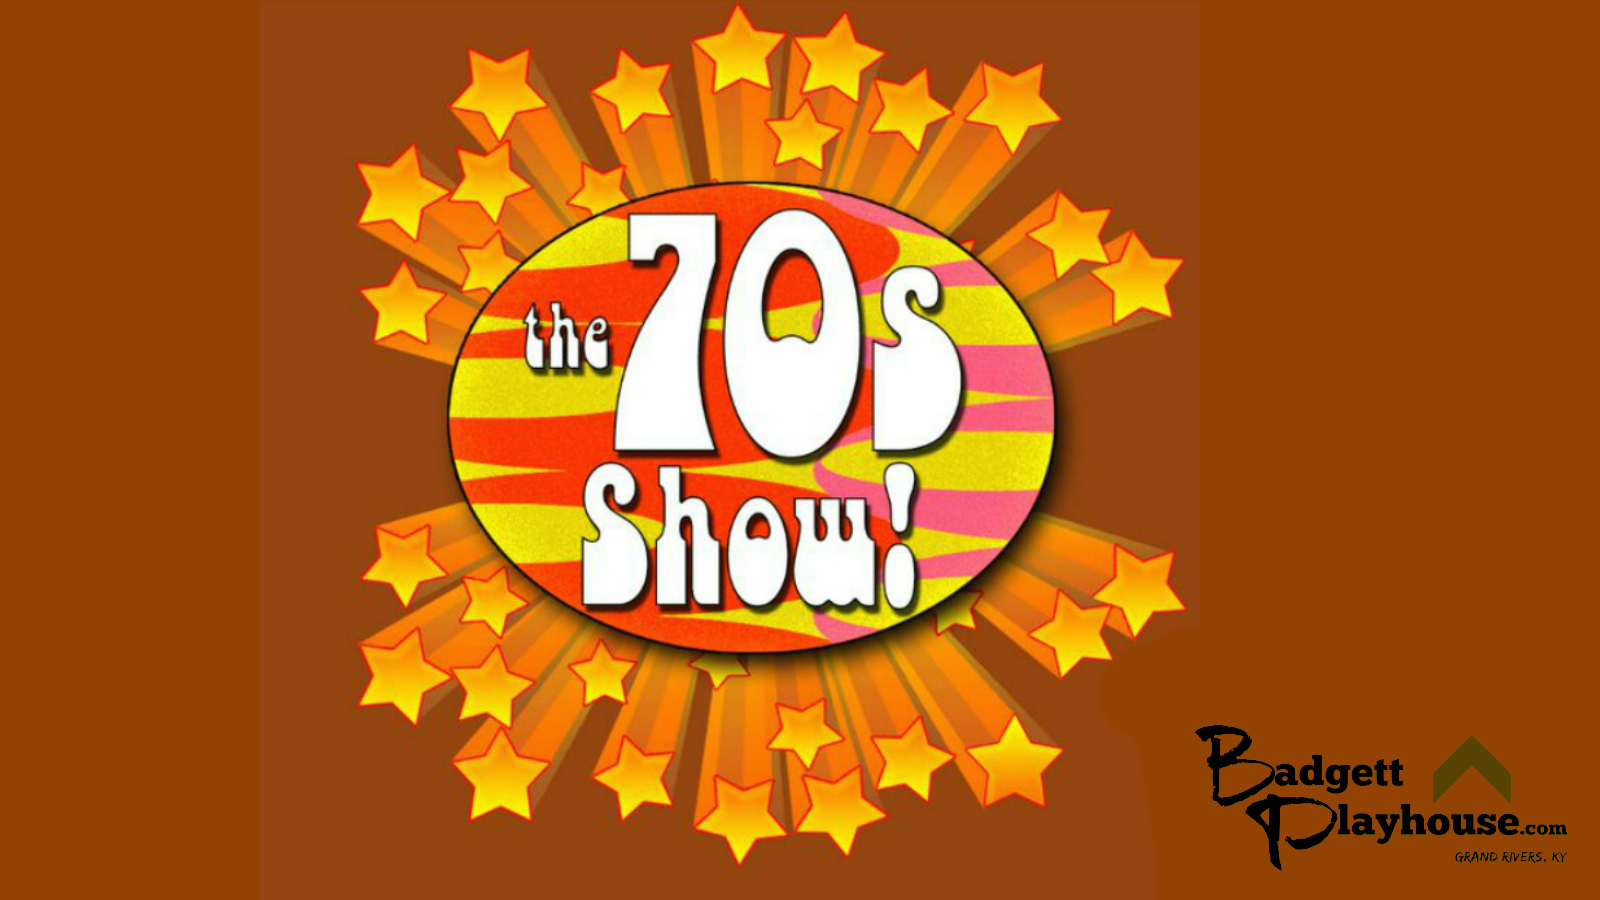 The 70’s Show The Badgett Playhouse